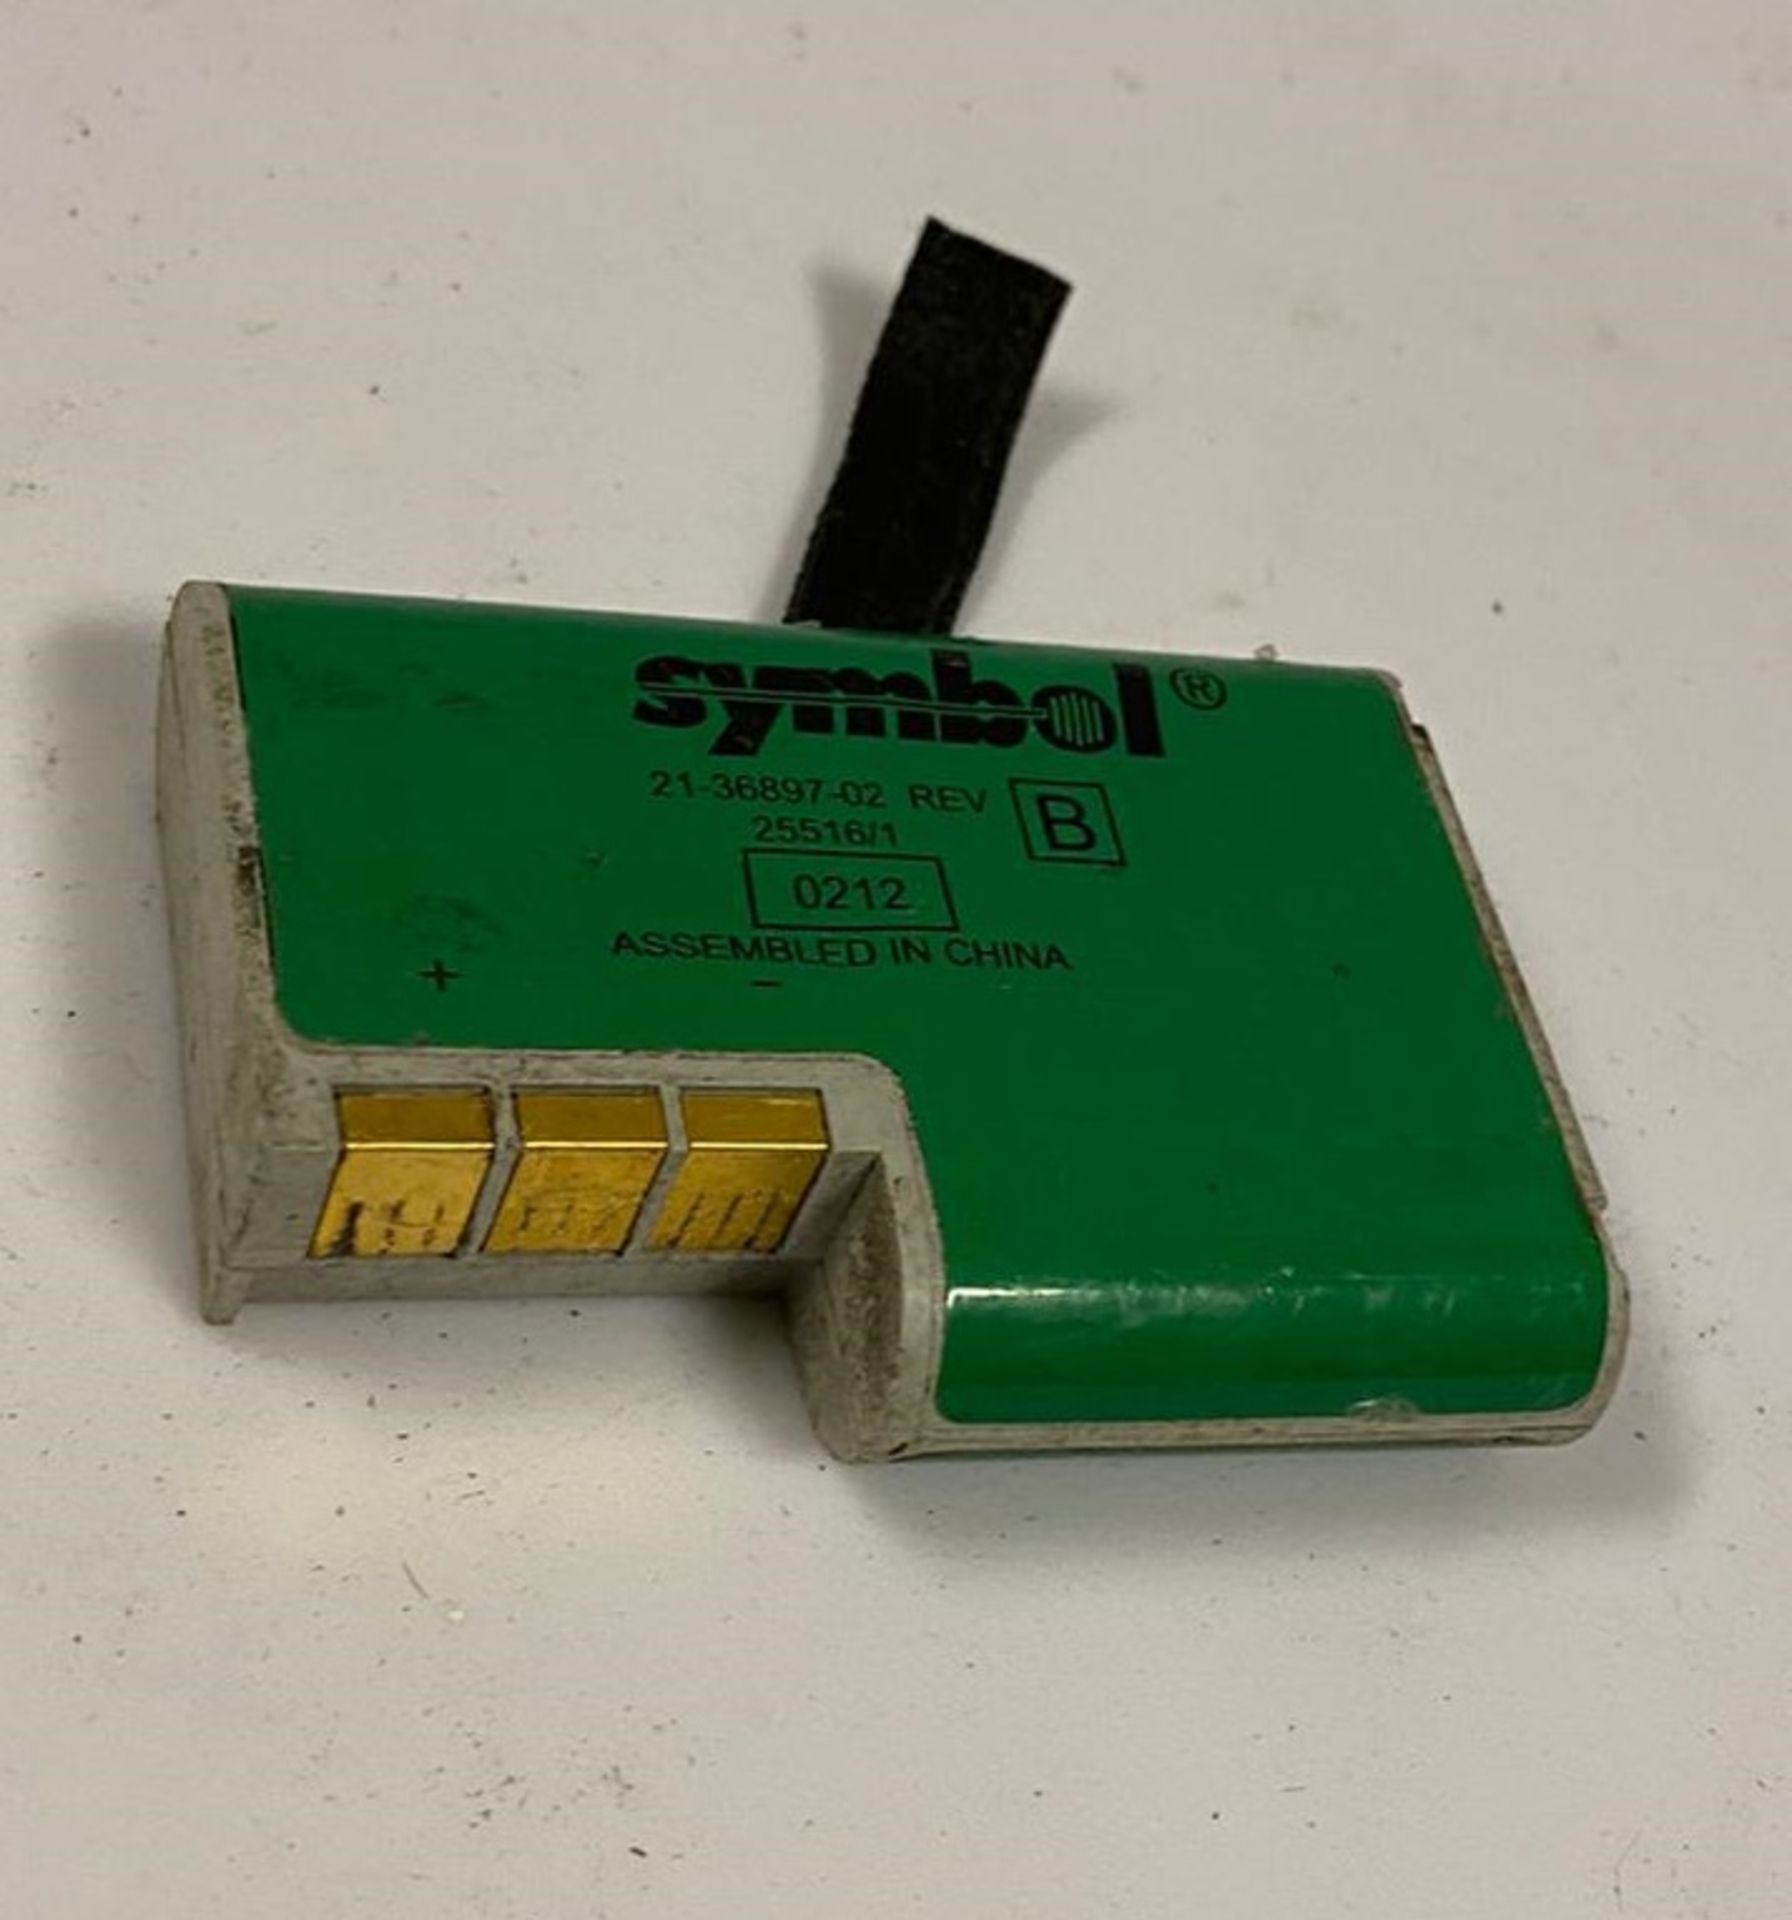 5 x Symbol 21-36897-02 Rechargeable 6.0V Batteries - Used Condition - Location: Altrincham WA14 - - Image 3 of 5